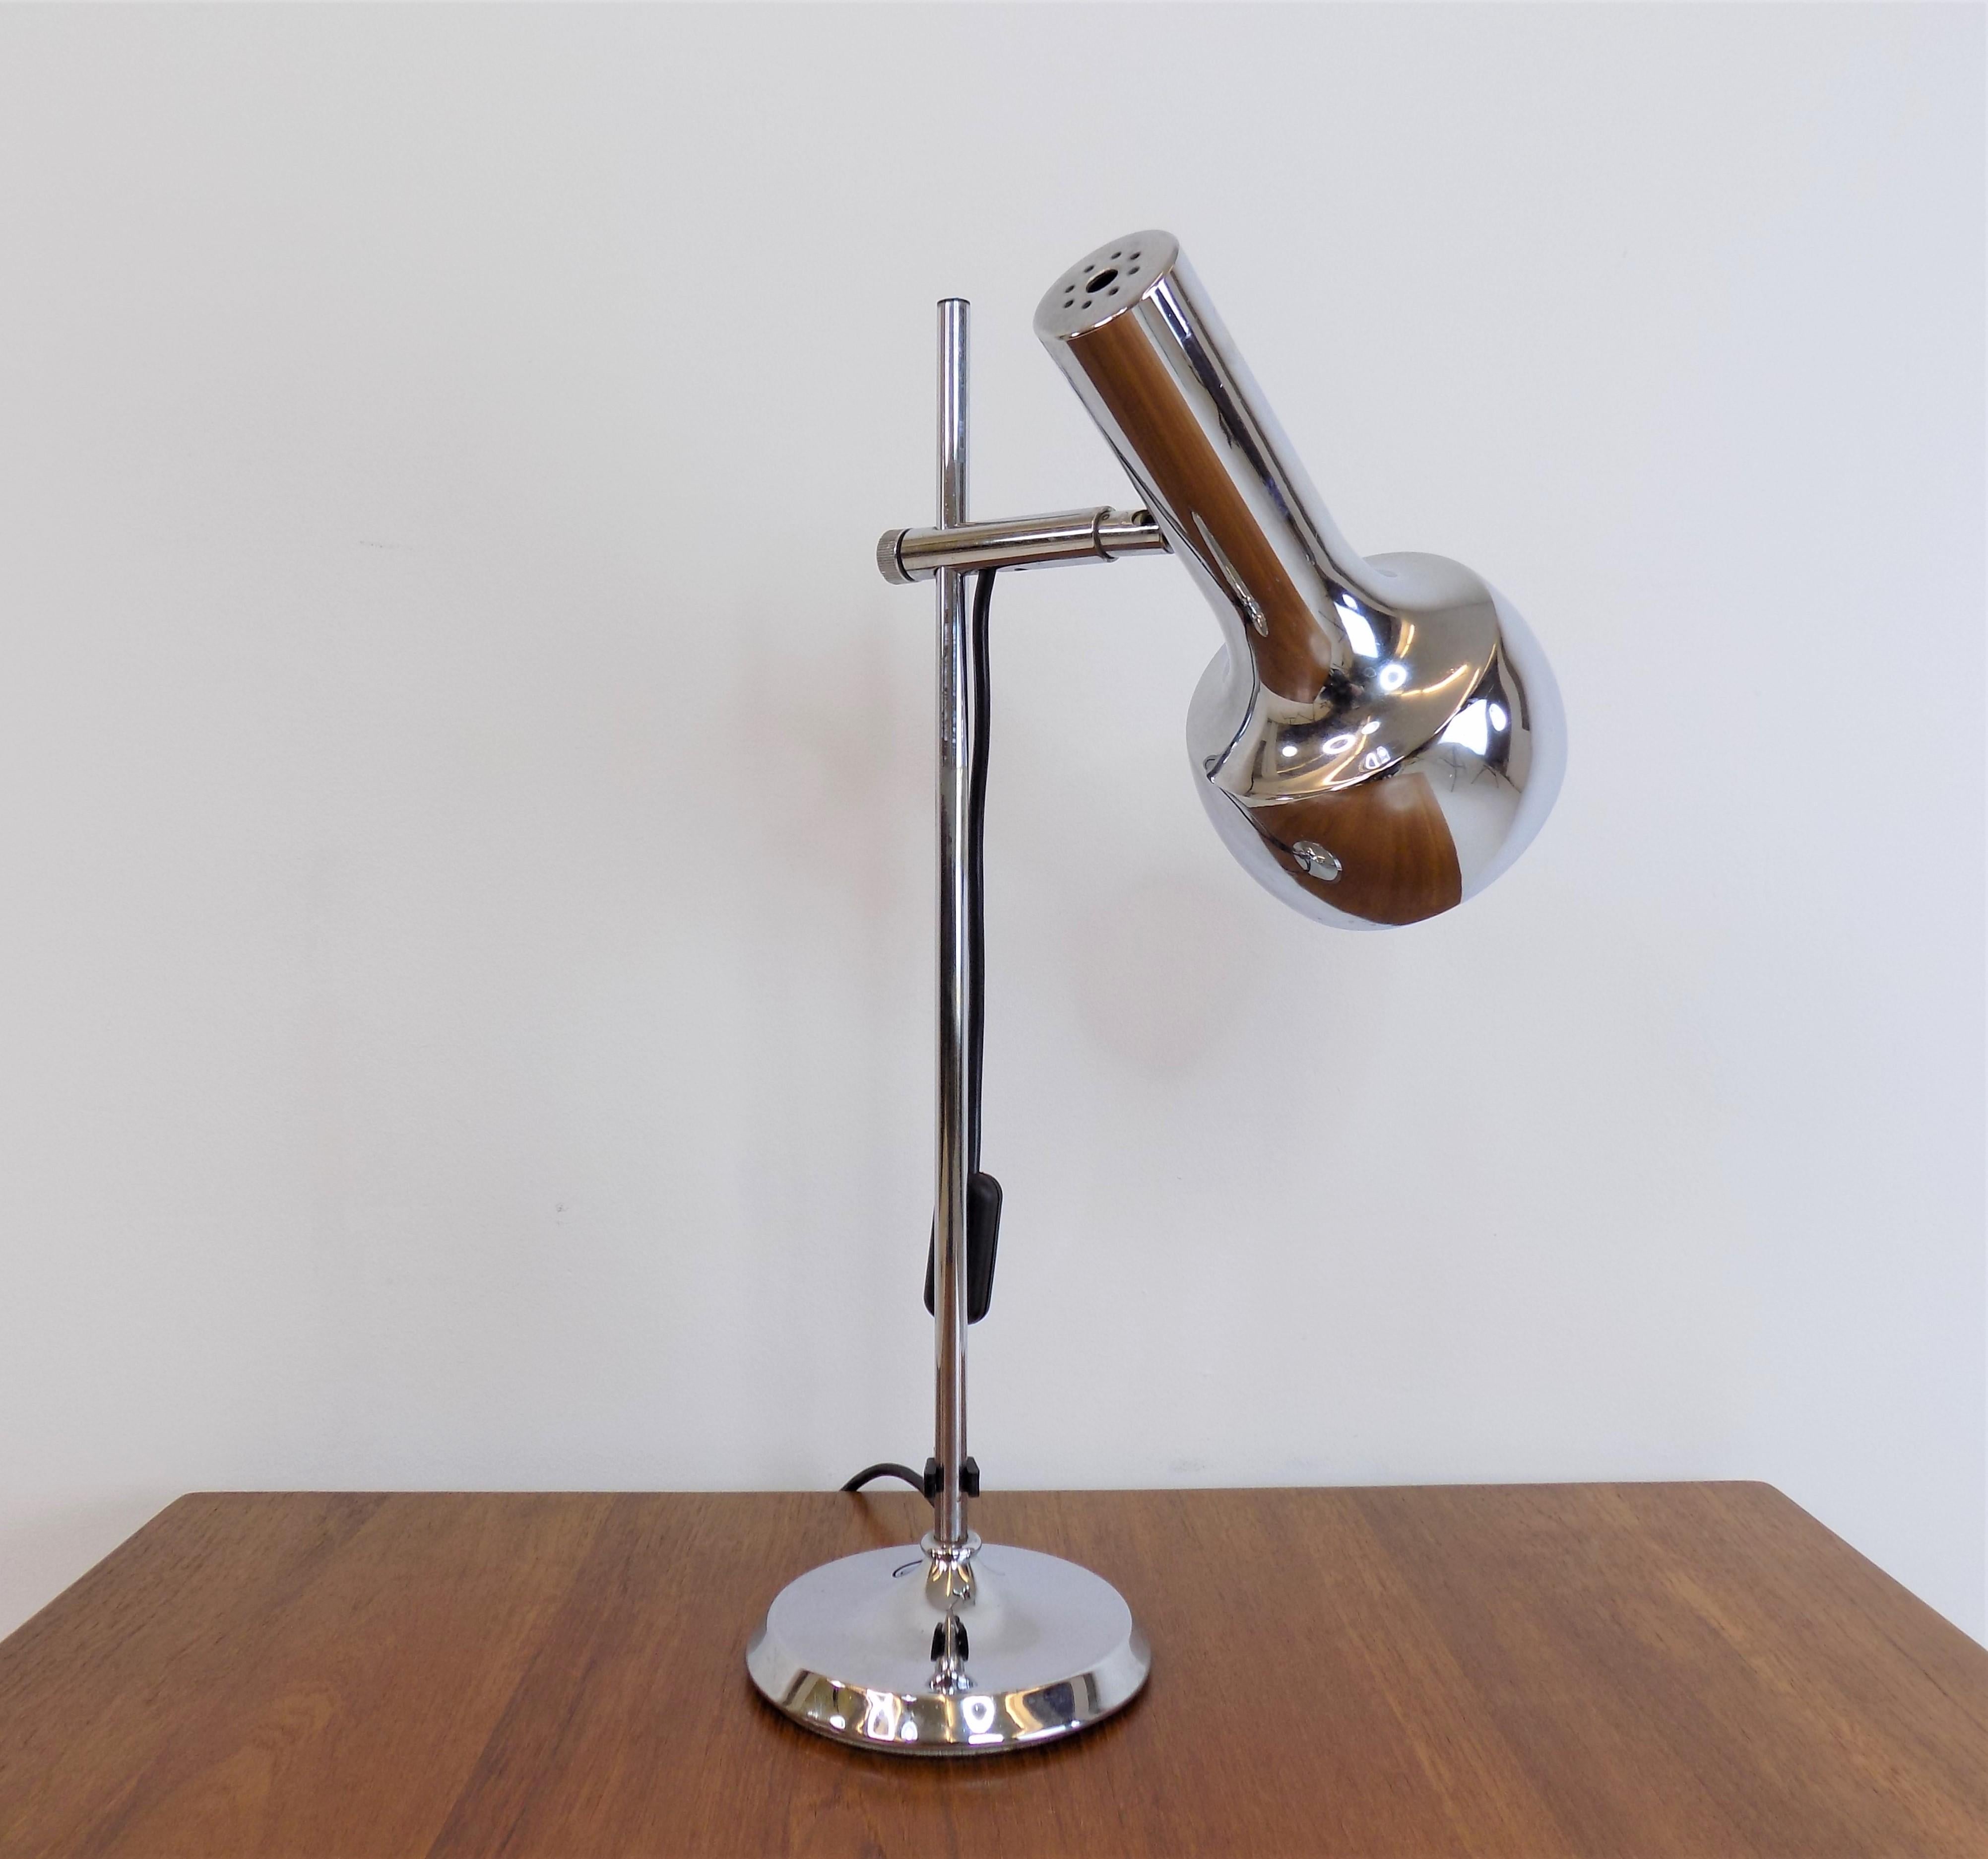 Table lamp from the 1960s by the German brothers Leclaire & Schäfer, with chromed lampshade, is in very good condition. The lampshade can be adjusted in height using a metal rod and rotated by almost 360 degrees. The functionality of the lamp is